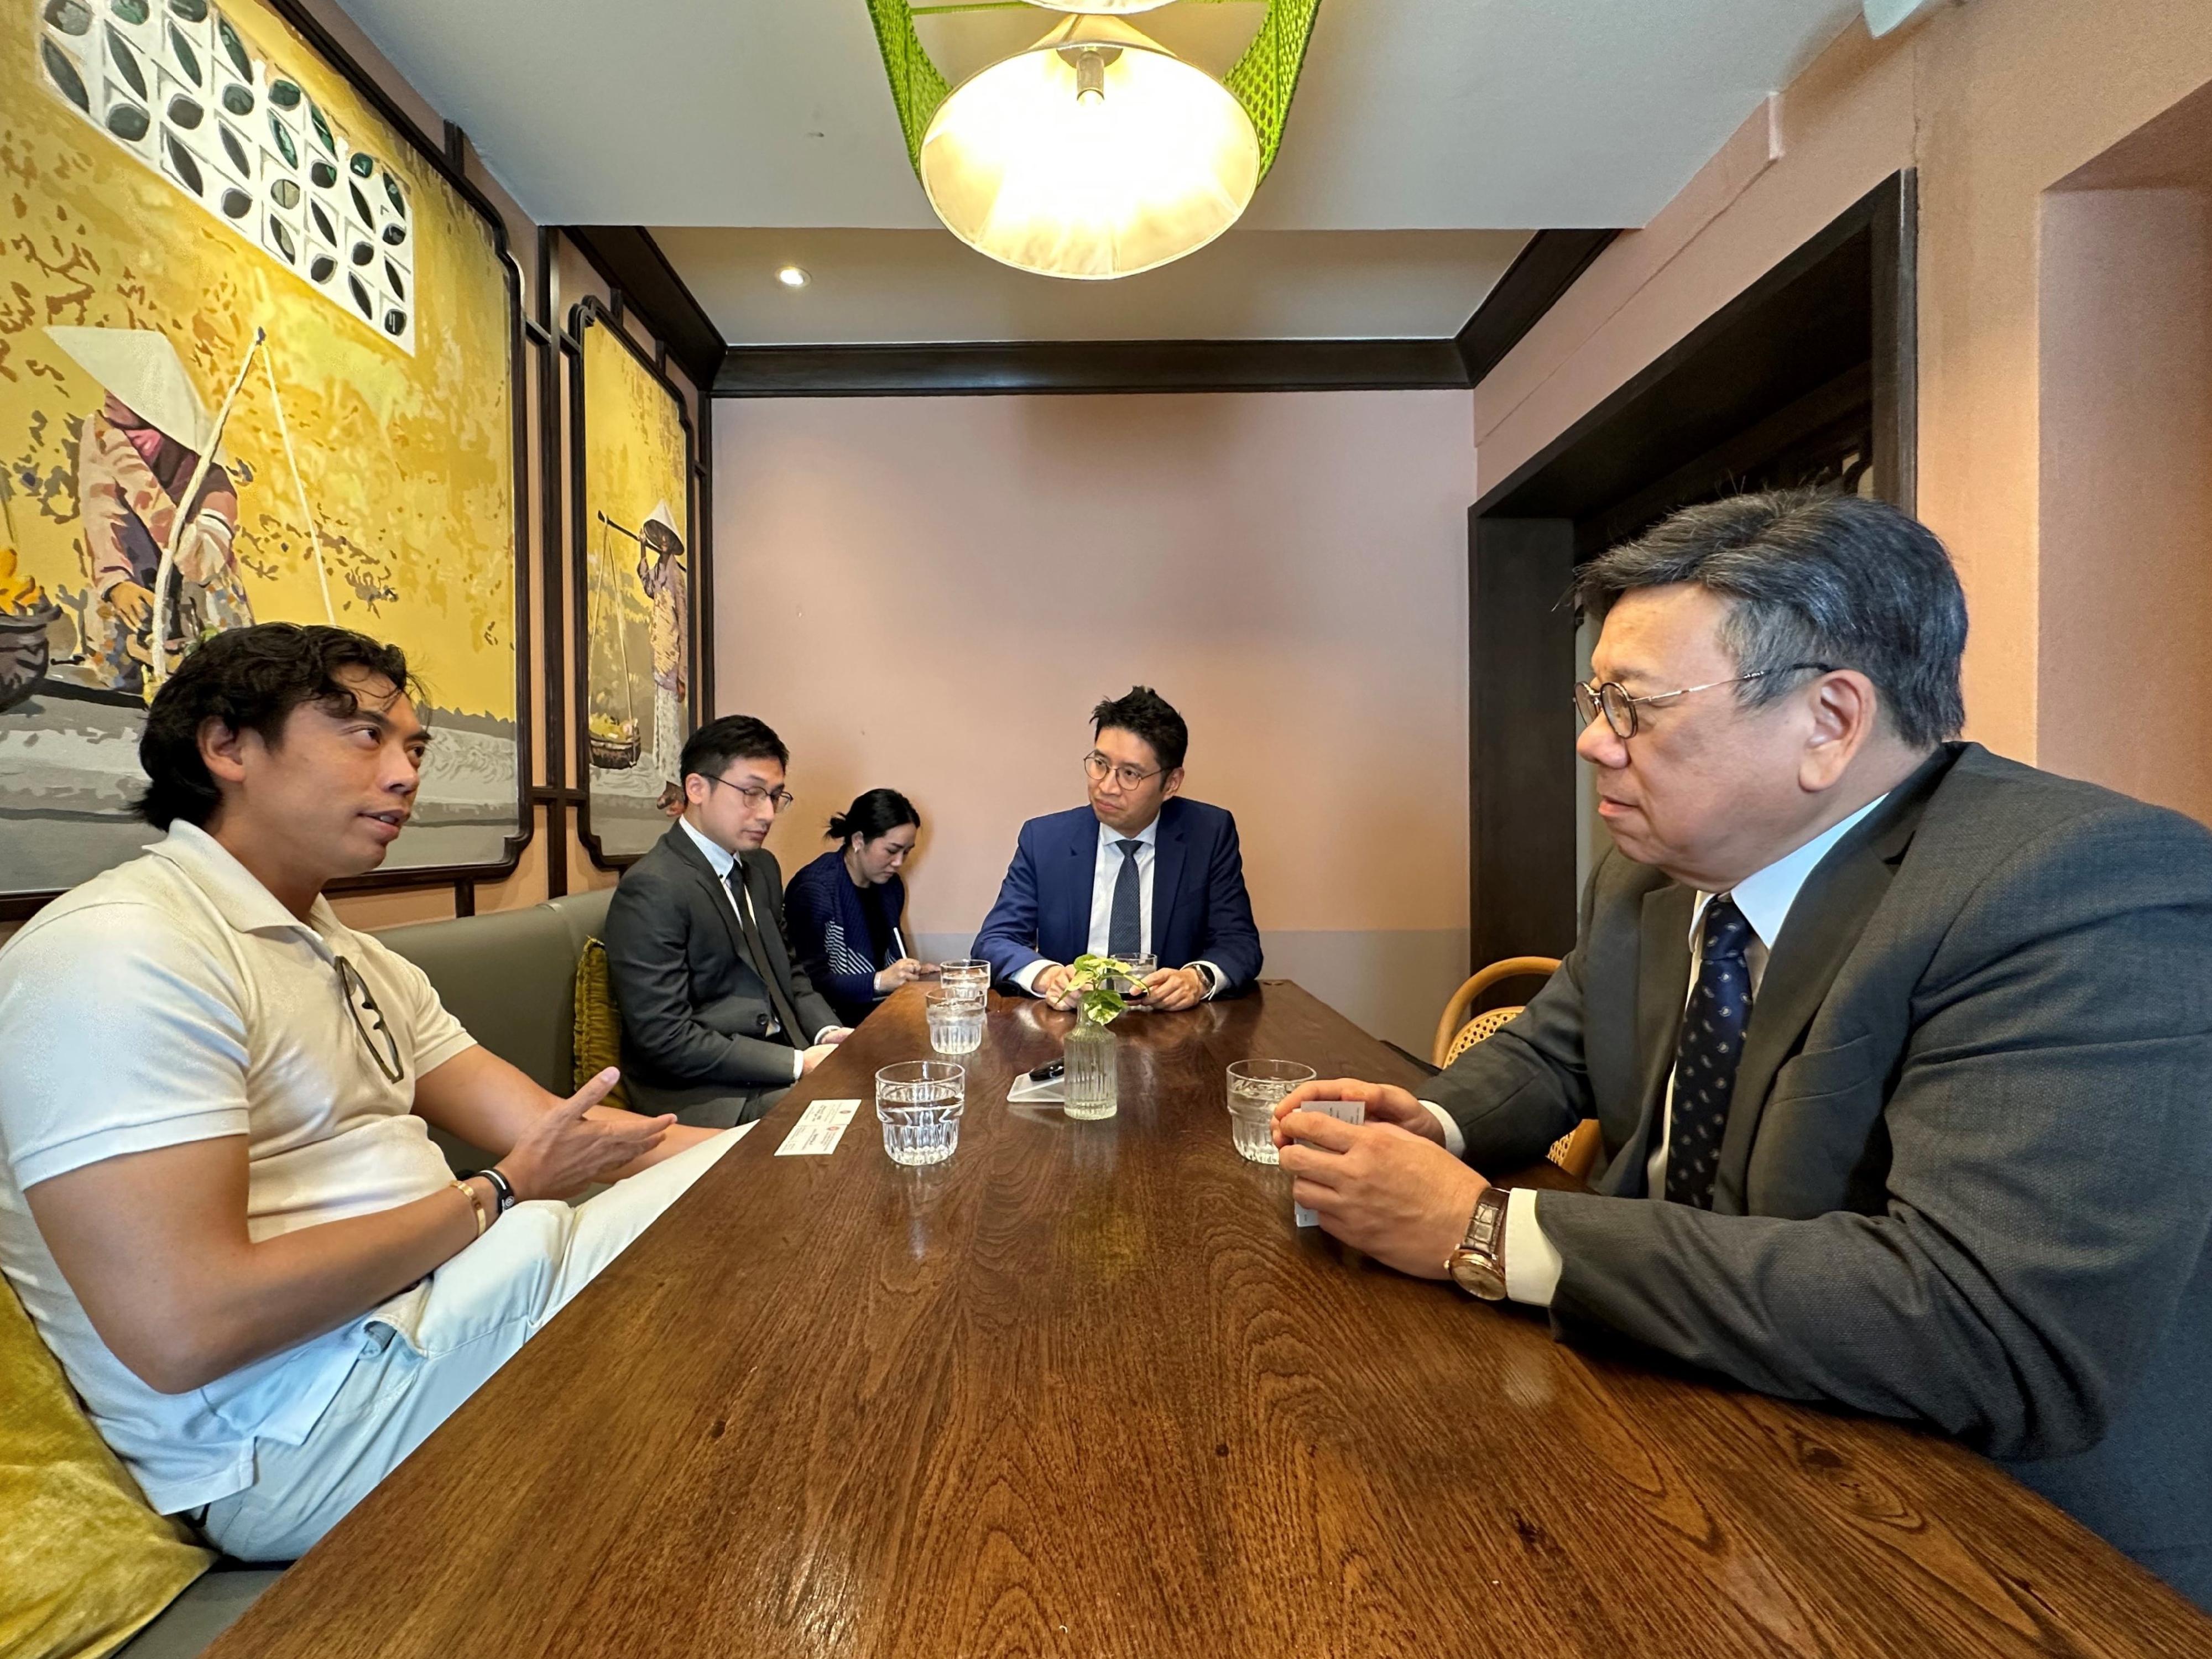 The Secretary for Commerce and Economic Development, Mr Algernon Yau (first right), meets with the Director of iberry Group, Mr Rojanin Arthayukti (first left), in Bangkok, Thailand, today (July 13) to update him on the latest Hong Kong developments and initiatives on attracting enterprises and investments. The group currently operates over 60 restaurants in Bangkok. The Director of the Hong Kong Economic and Trade Office in Bangkok, Mr Lee Sheung-yuen (second right), also attended the meeting.